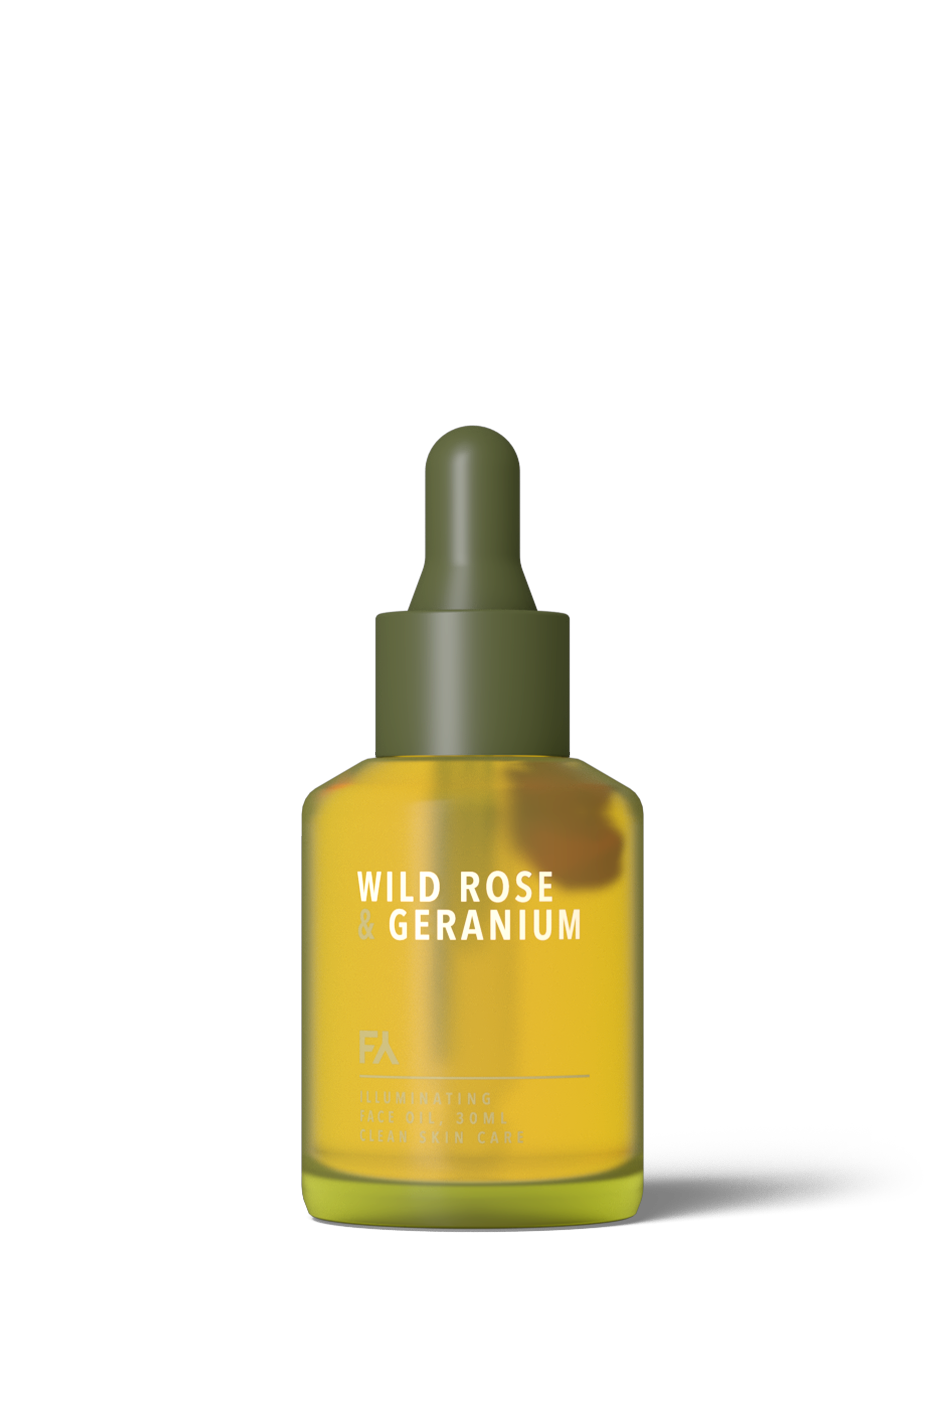 Product picture of the Wild Rose & Geranium Illuminating Face Oil by Fields of Yarrow on a transparent background.